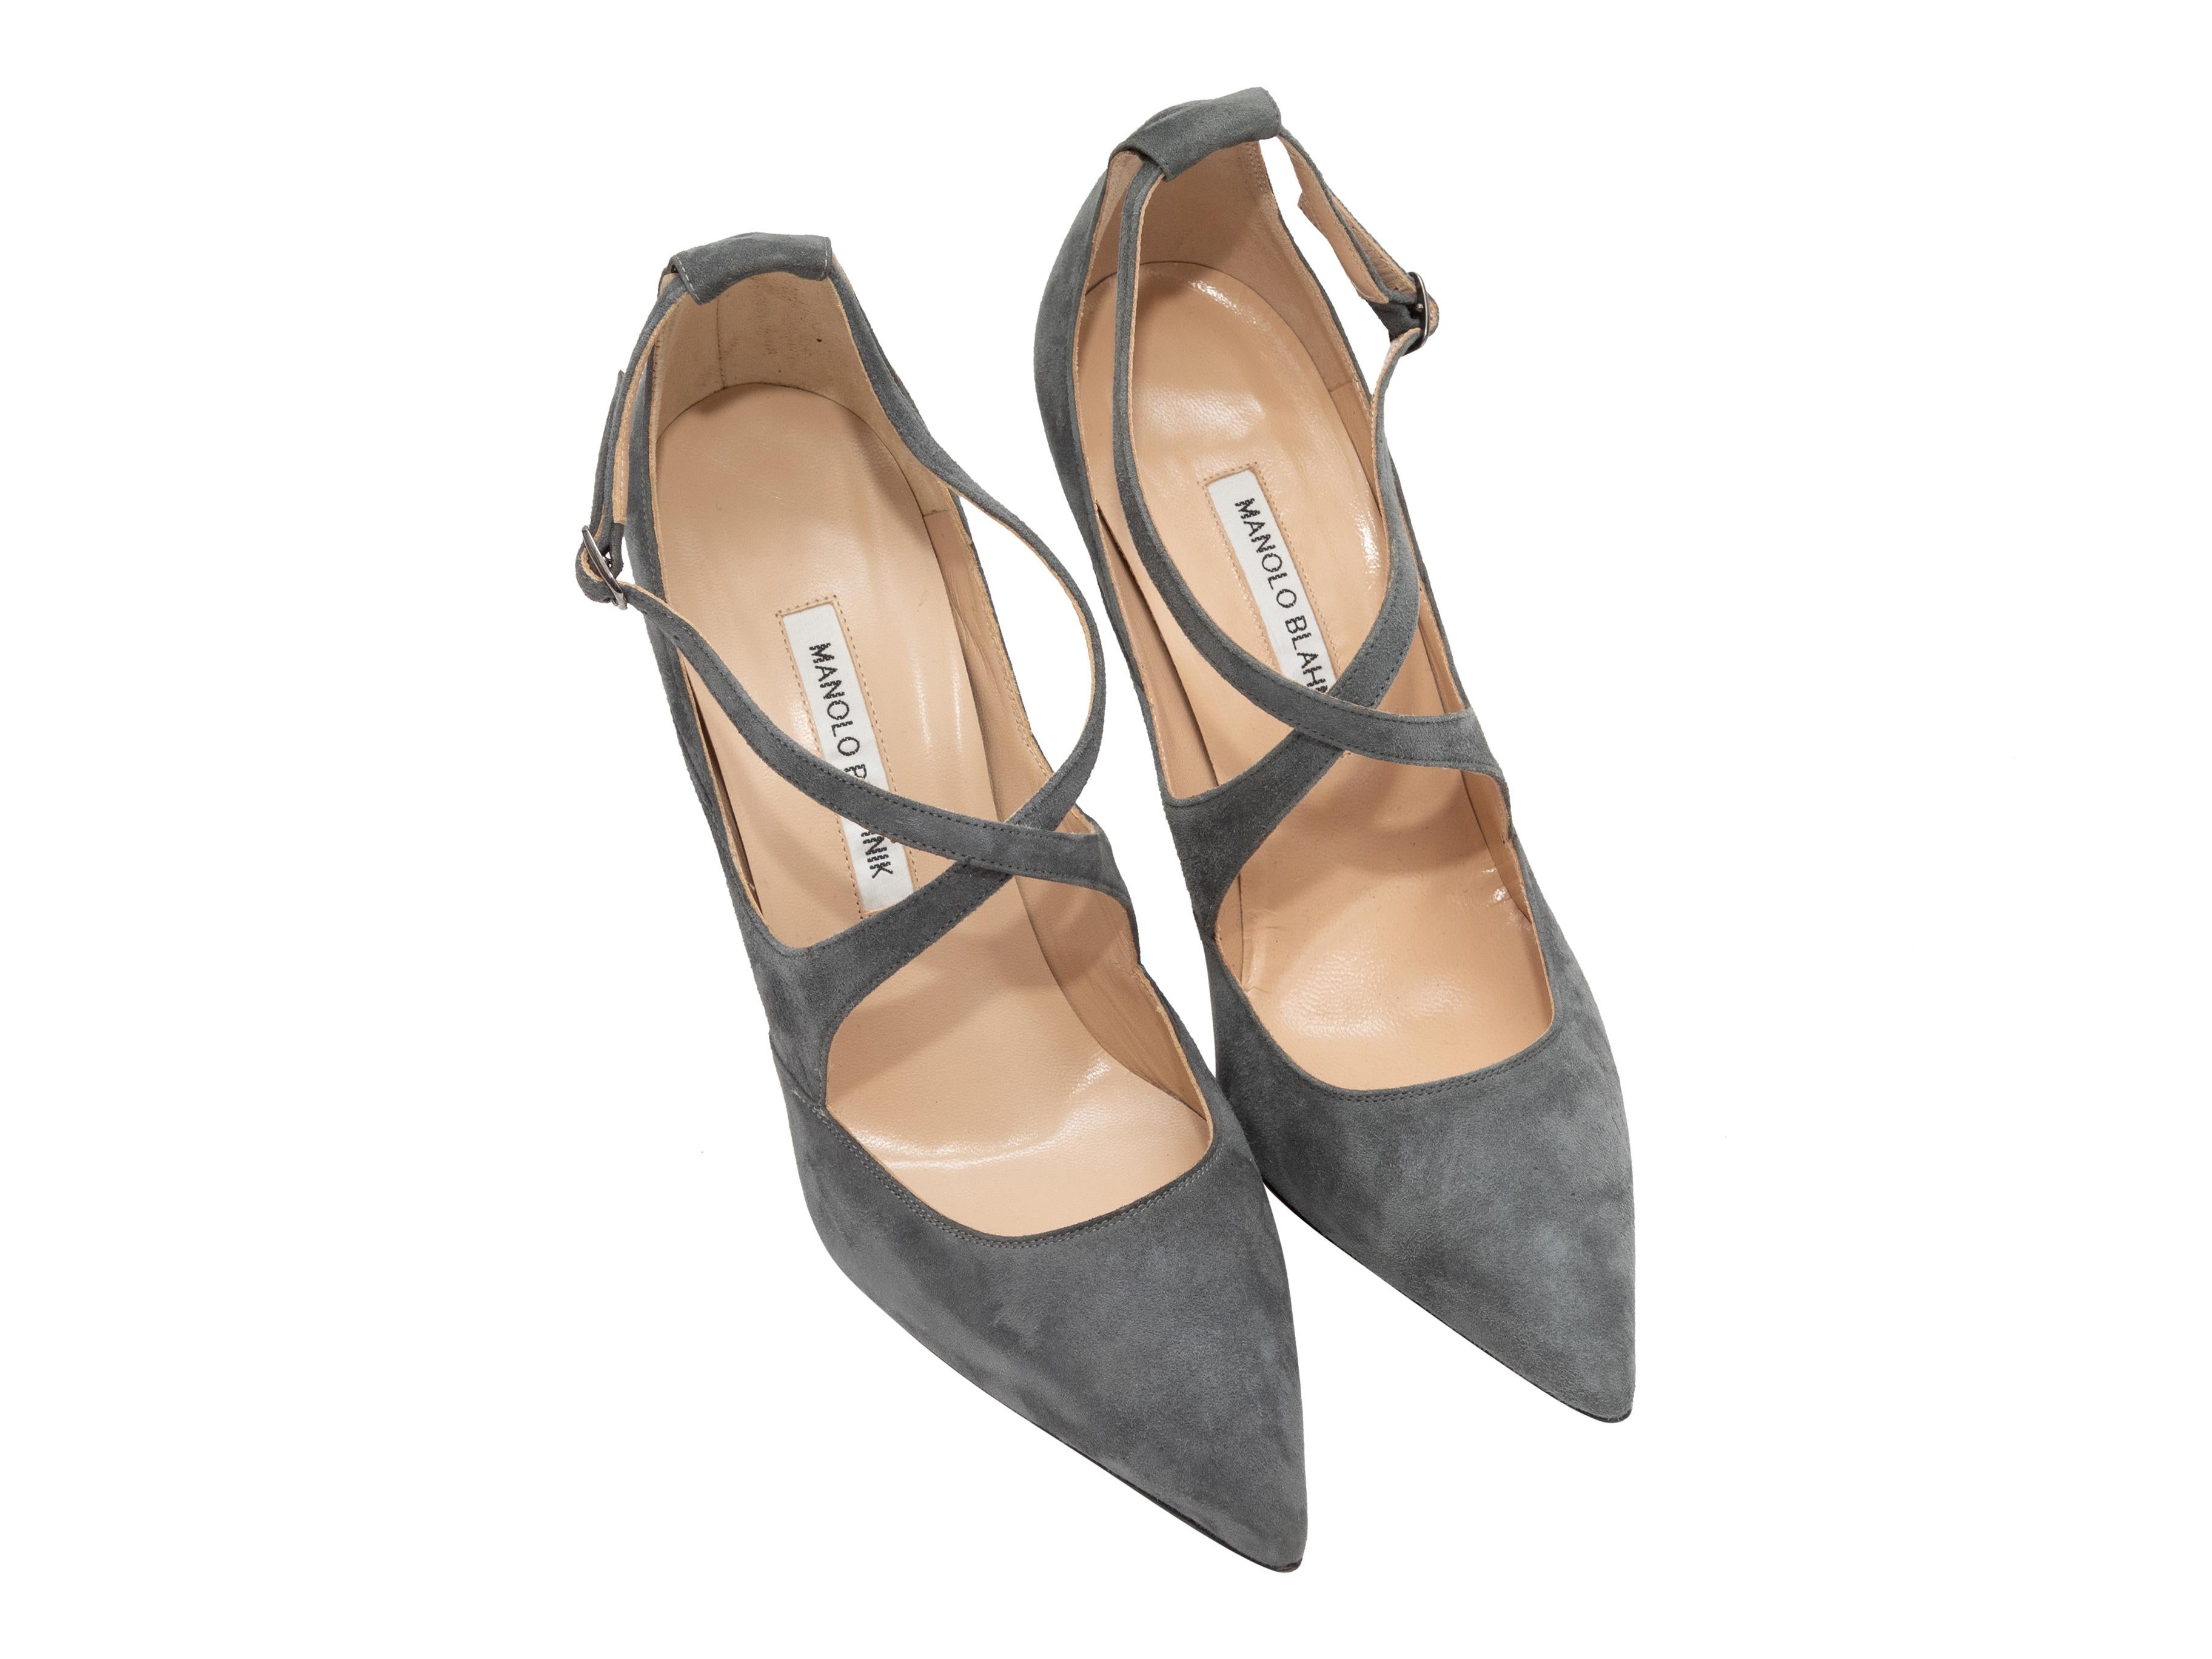 Product Details: Grey suede pointed-toe criss-cross pumps by Manolo Blahnik. Buckle closures at ankle straps. 4